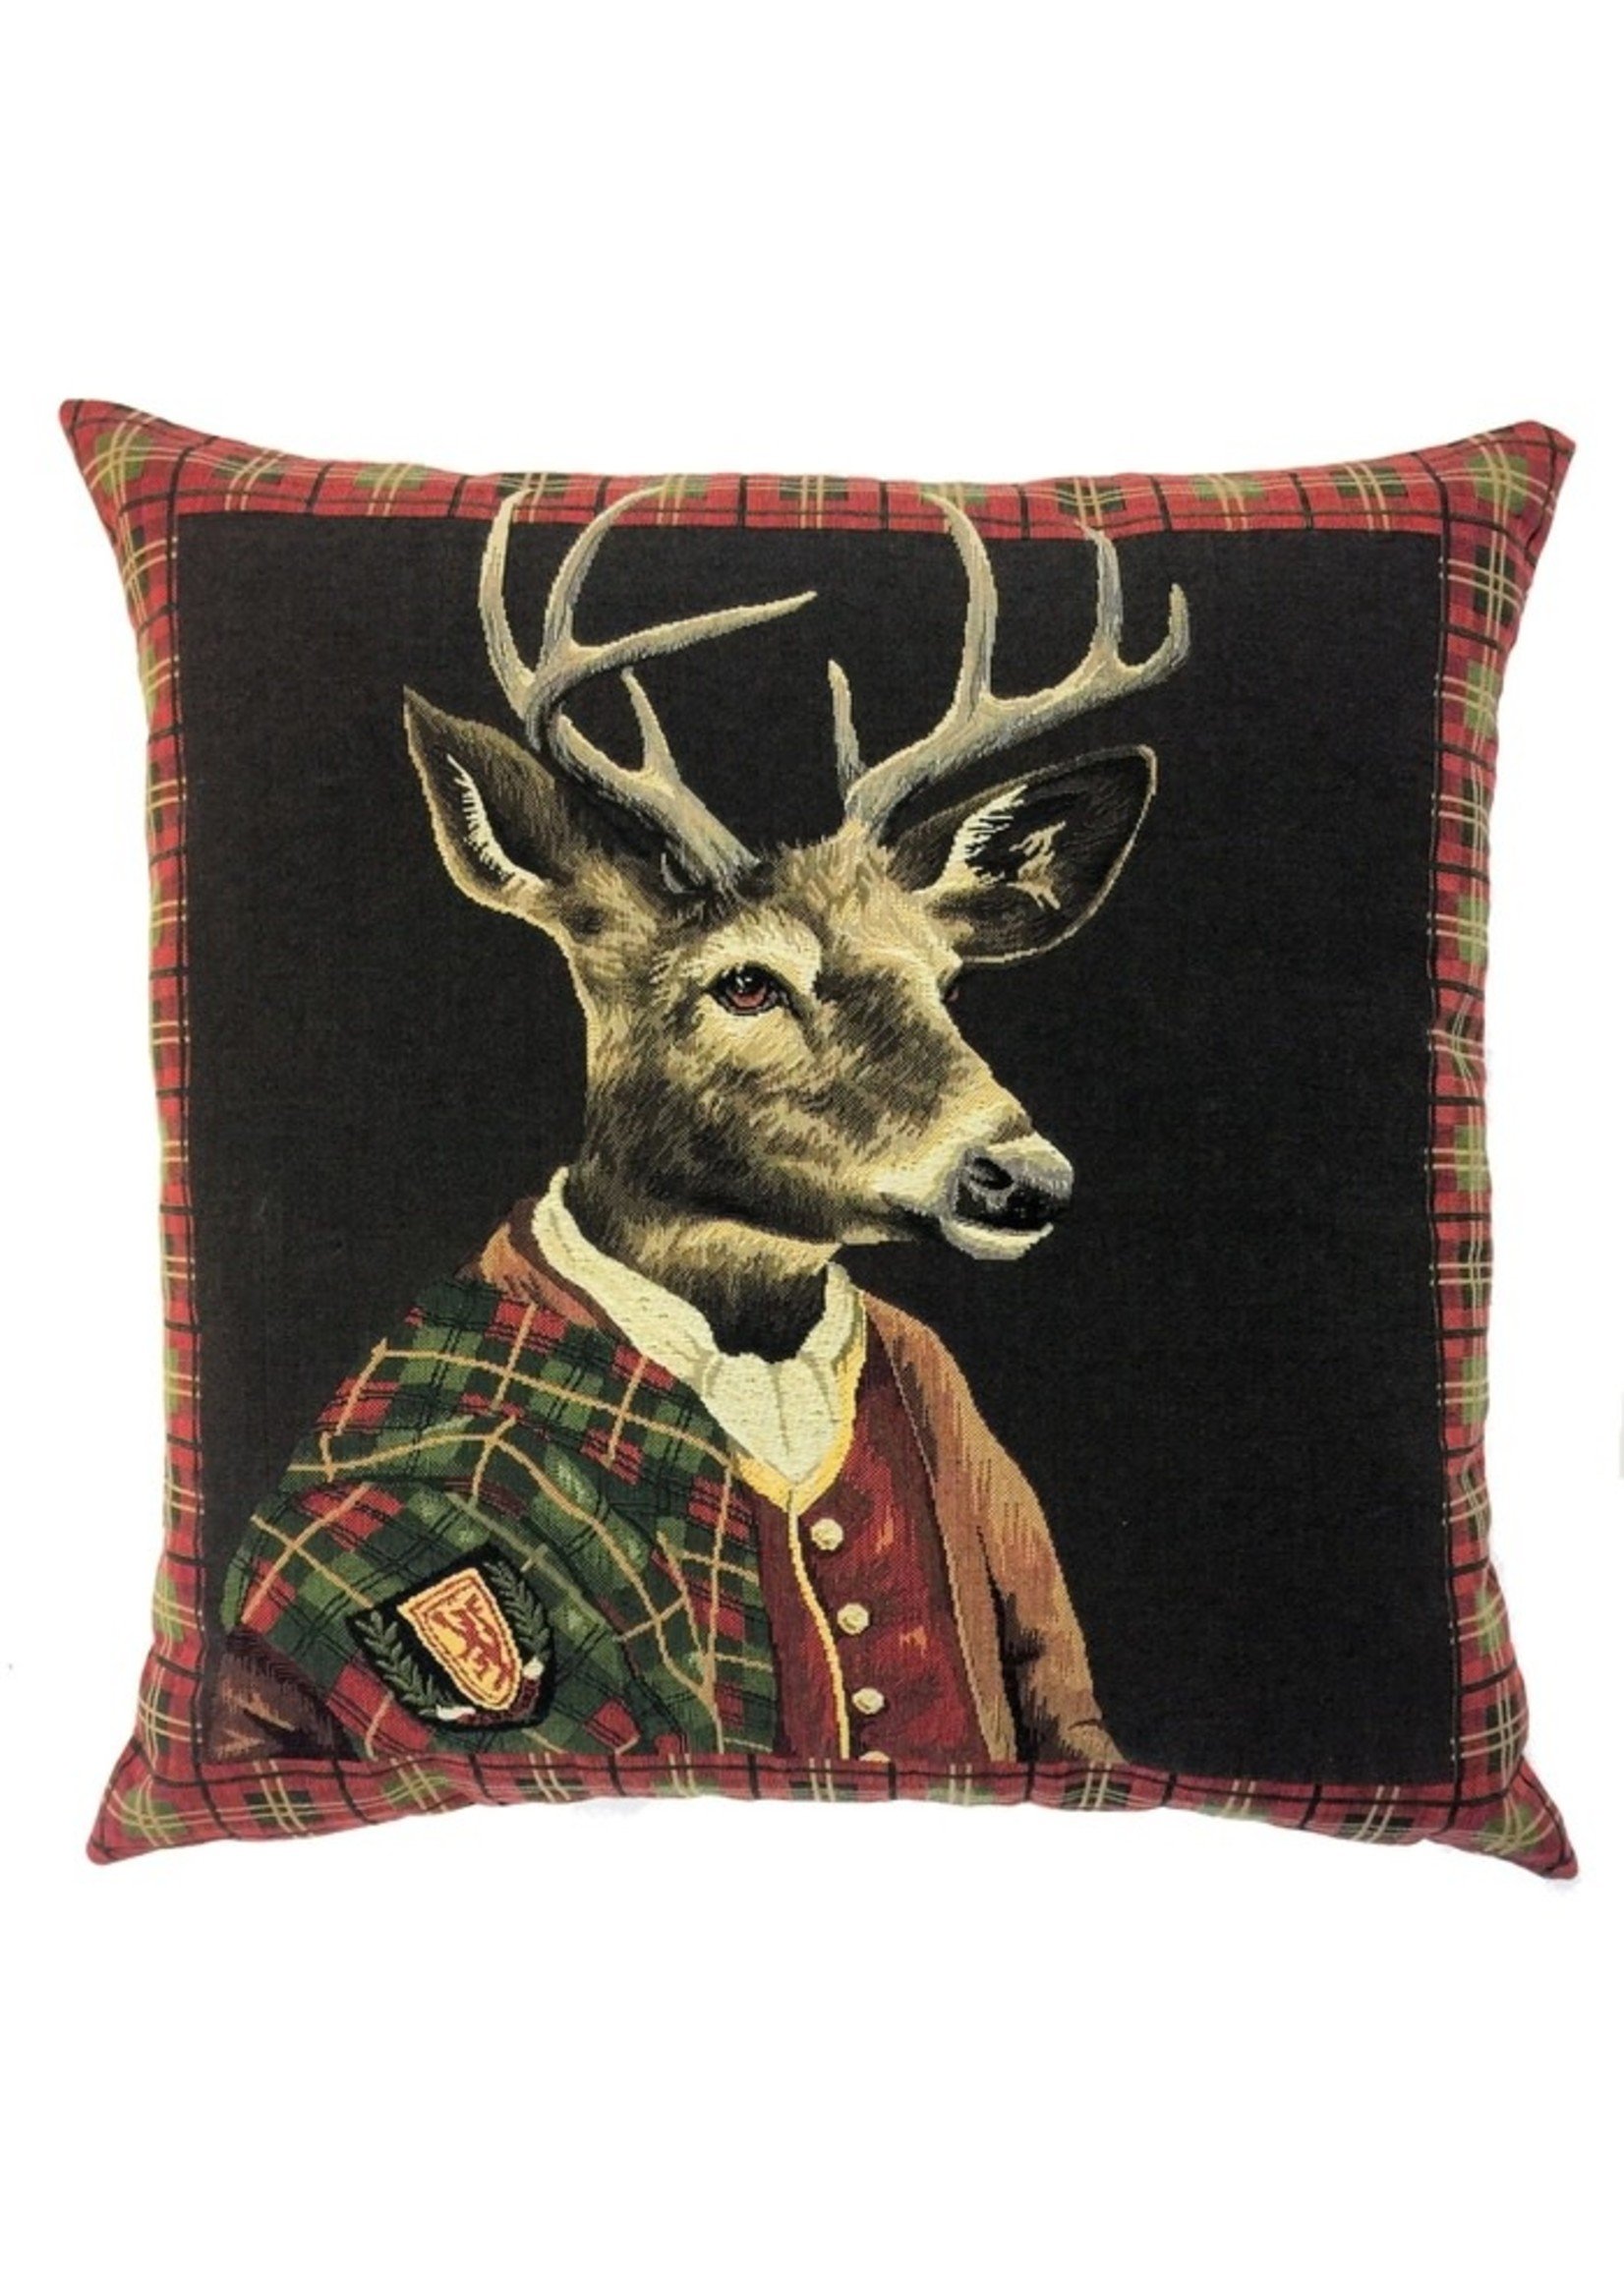 Pillow with Insert - Stag McKenzie